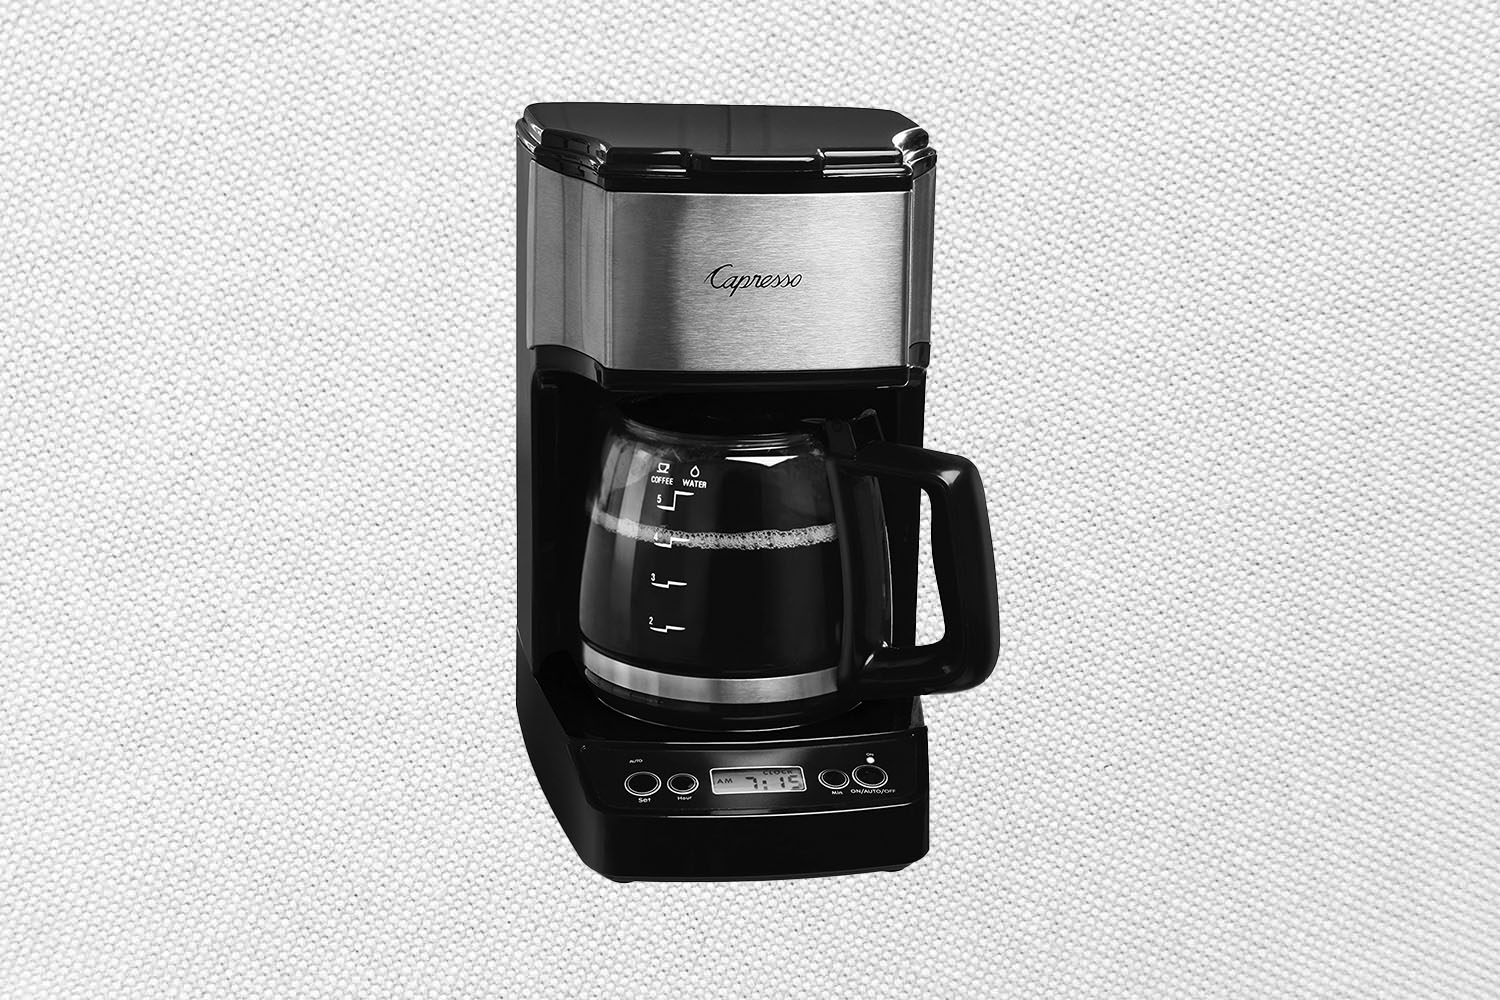 The Capresso 5-Cup Mini Drip Coffee Maker on a white patterned background